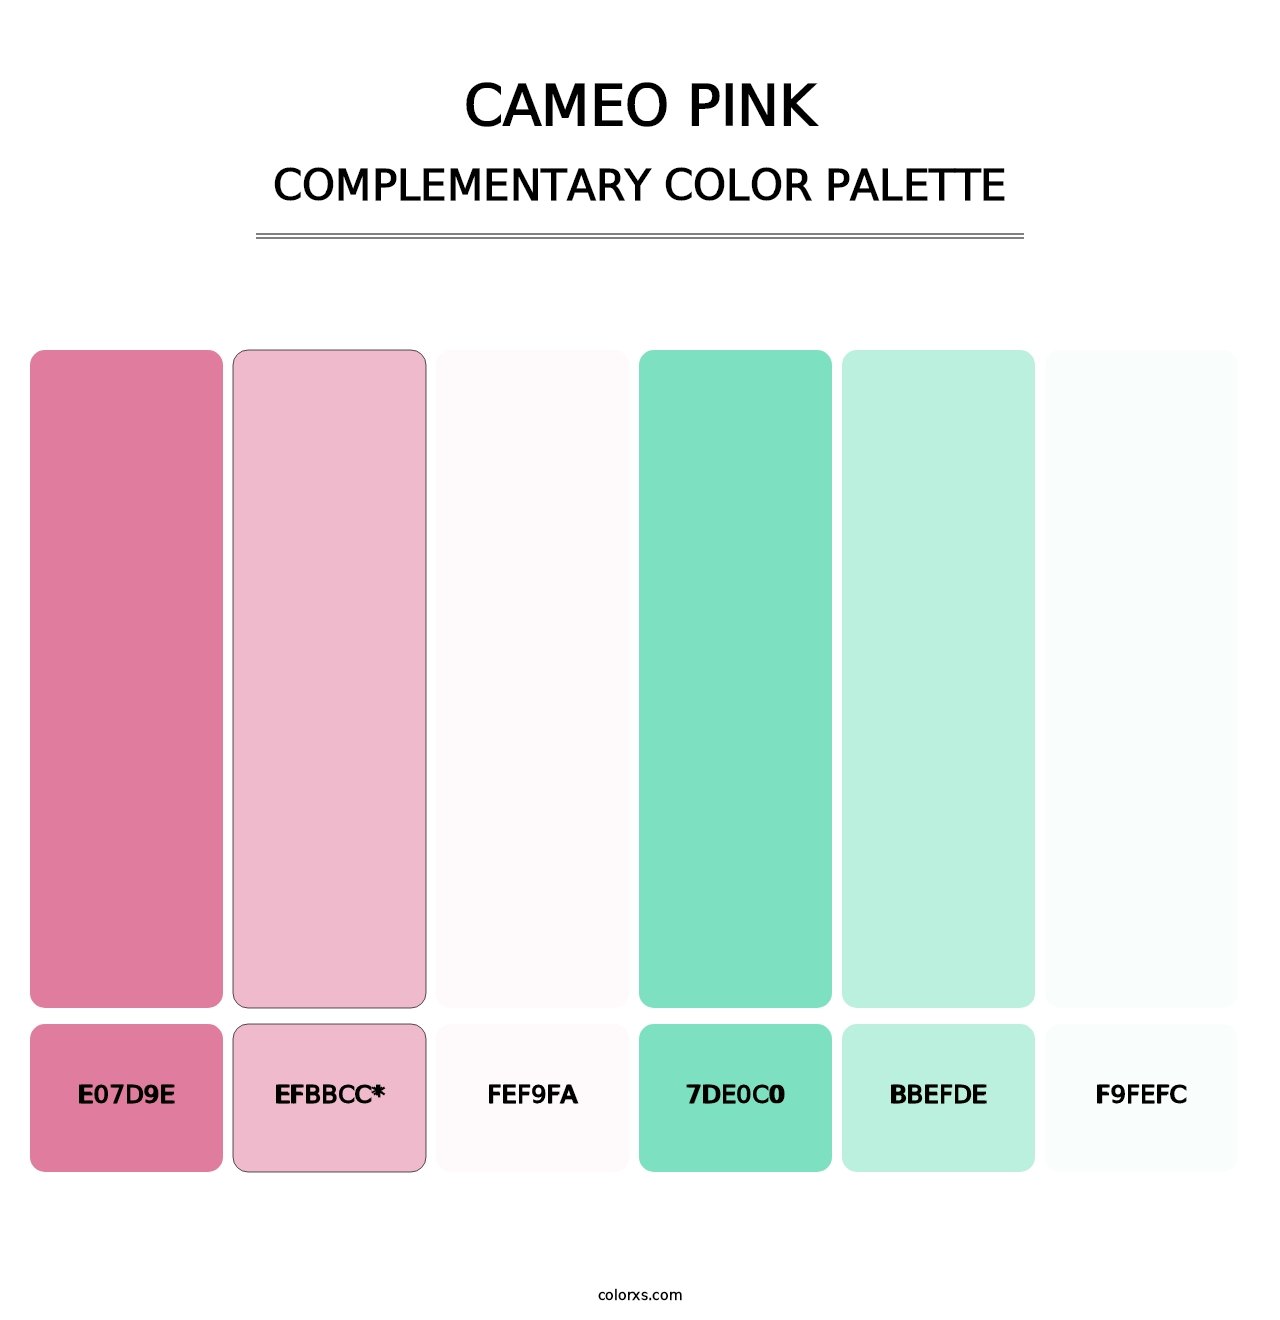 Cameo Pink - Complementary Color Palette